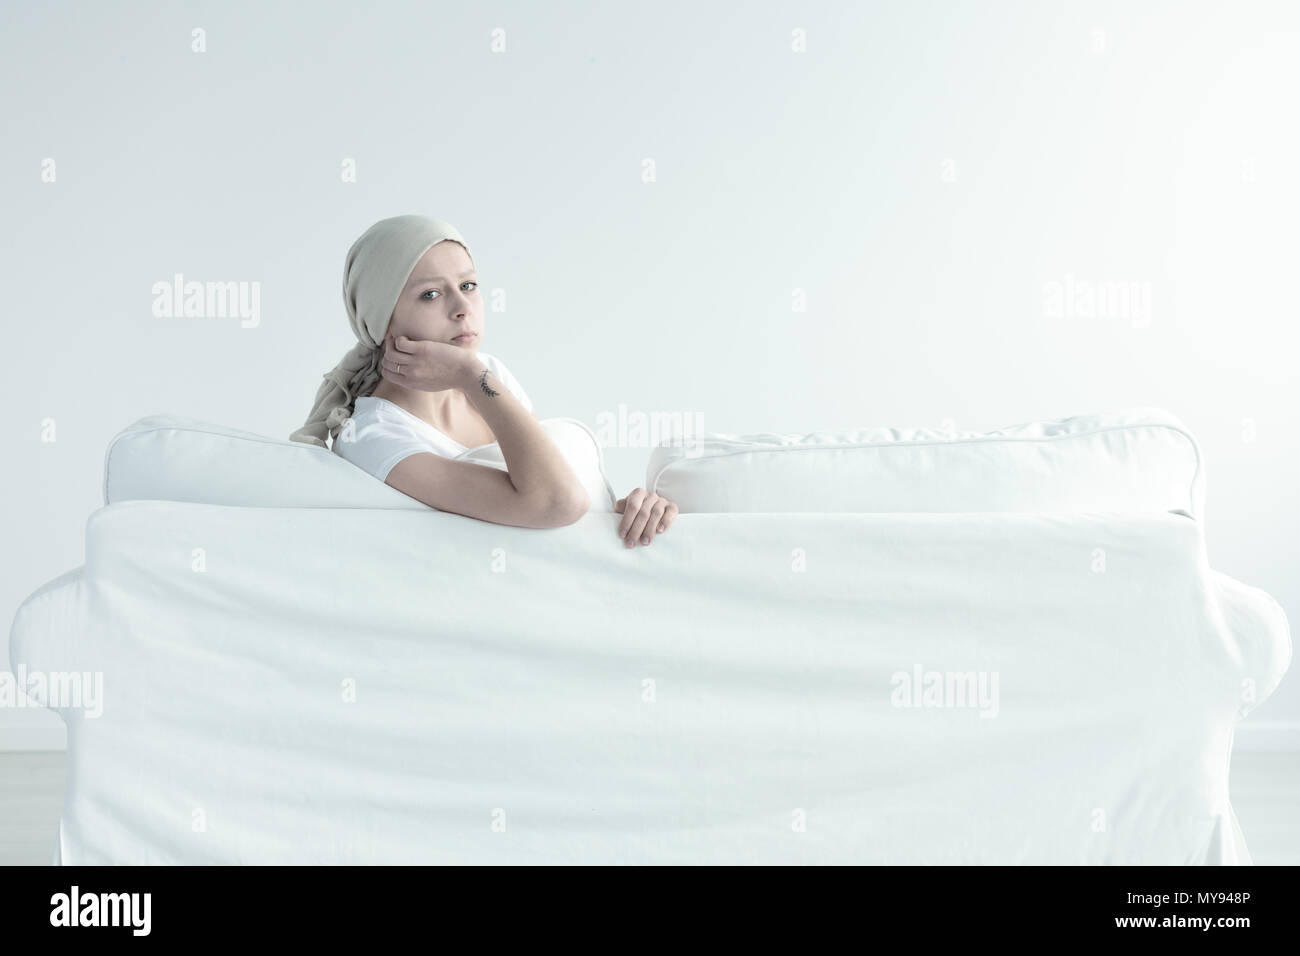 Sadness and loneliness during cancer diseaese treatment Stock Photo